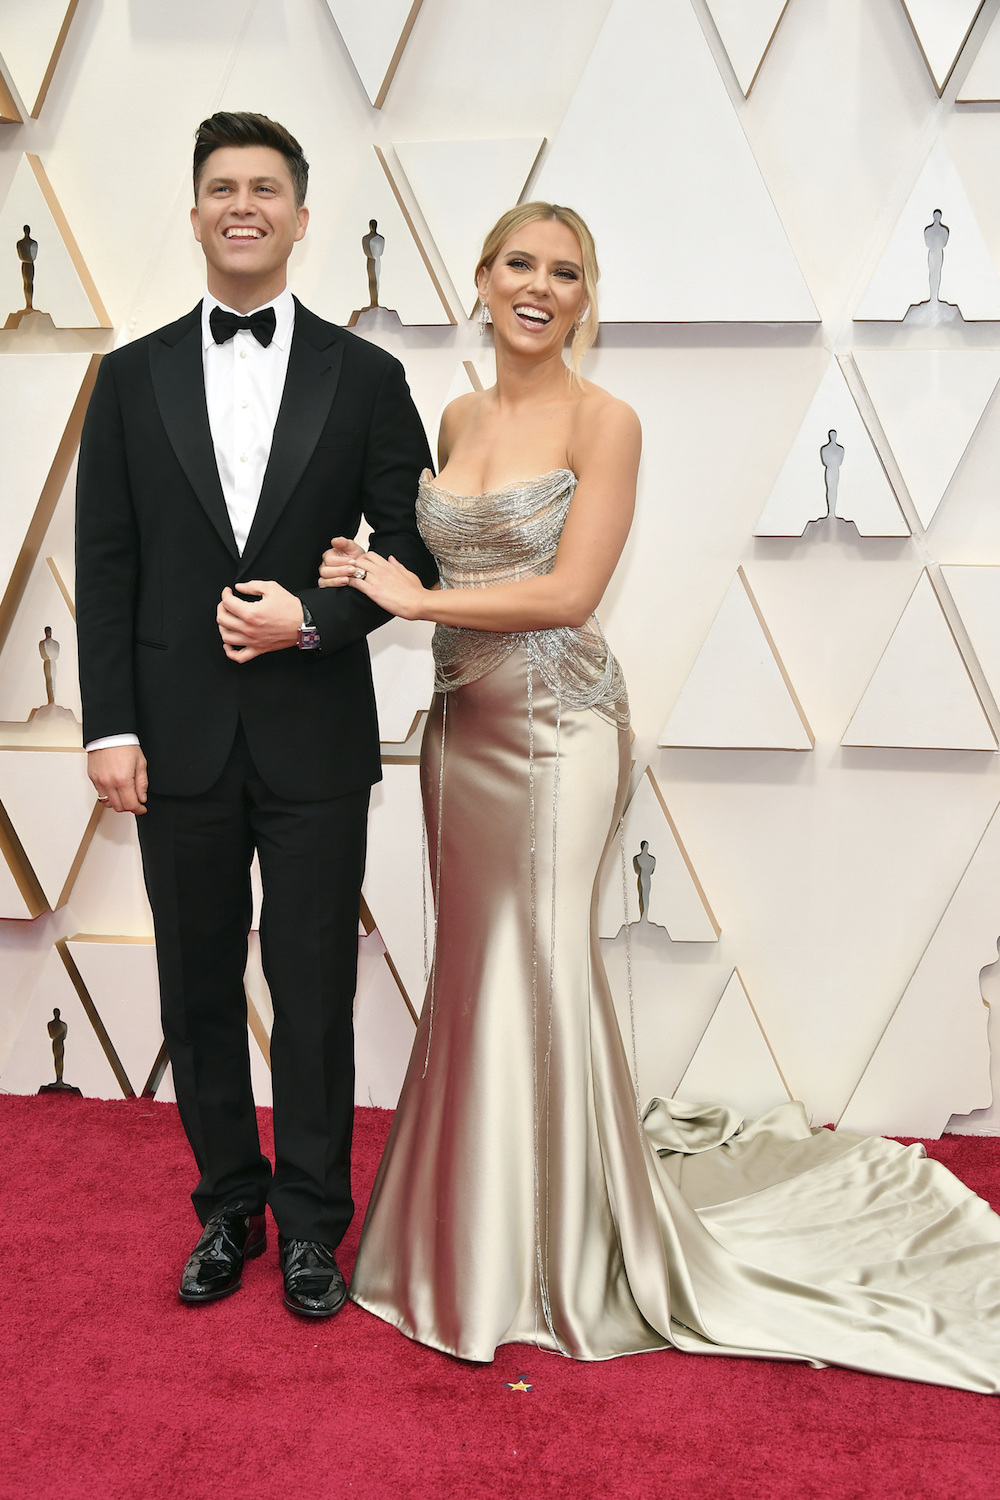 Oscars 2020: Red Carpet Winners & Watches